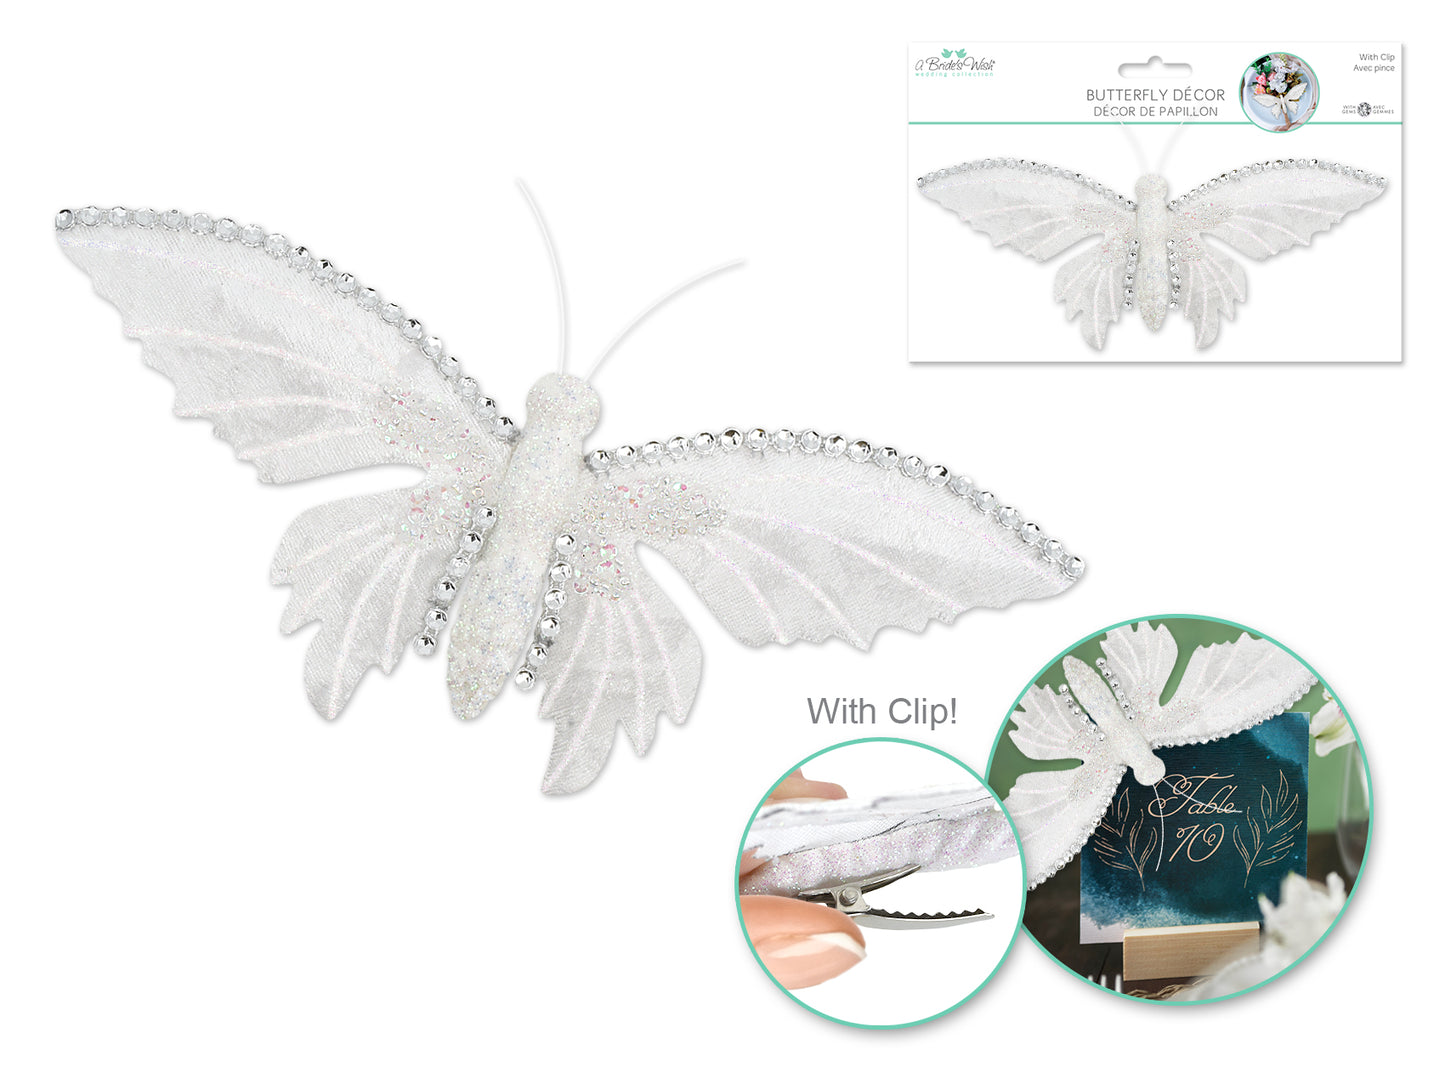 A Brides Wish: 7.5"x3.5" Giant Bling Butterfly w/Clip